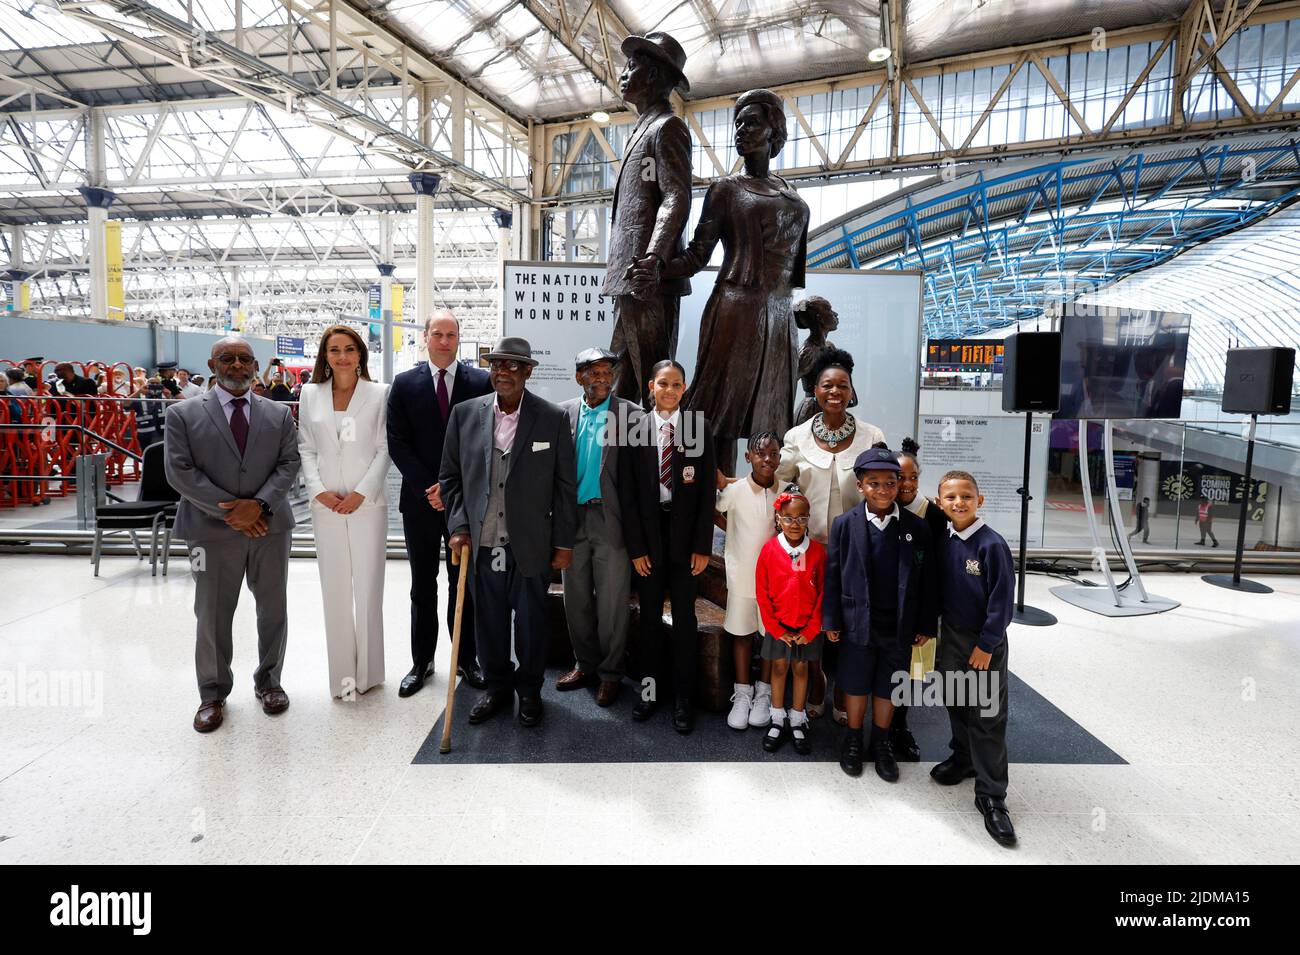 The Duke and Duchess of Cambridge, accompanied by Baroness Floella Benjamin, Windrush passengers Alford Gardner and John Richards and children at the unveiling of the National Windrush Monument at Waterloo Station, to mark Windrush Day. The statue - of a man, woman and child in their Sunday best standing on top of suitcases - was designed by the Jamaican artist and sculptor Basil Watson. Picture date: Wednesday June 22, 2022. Stock Photo